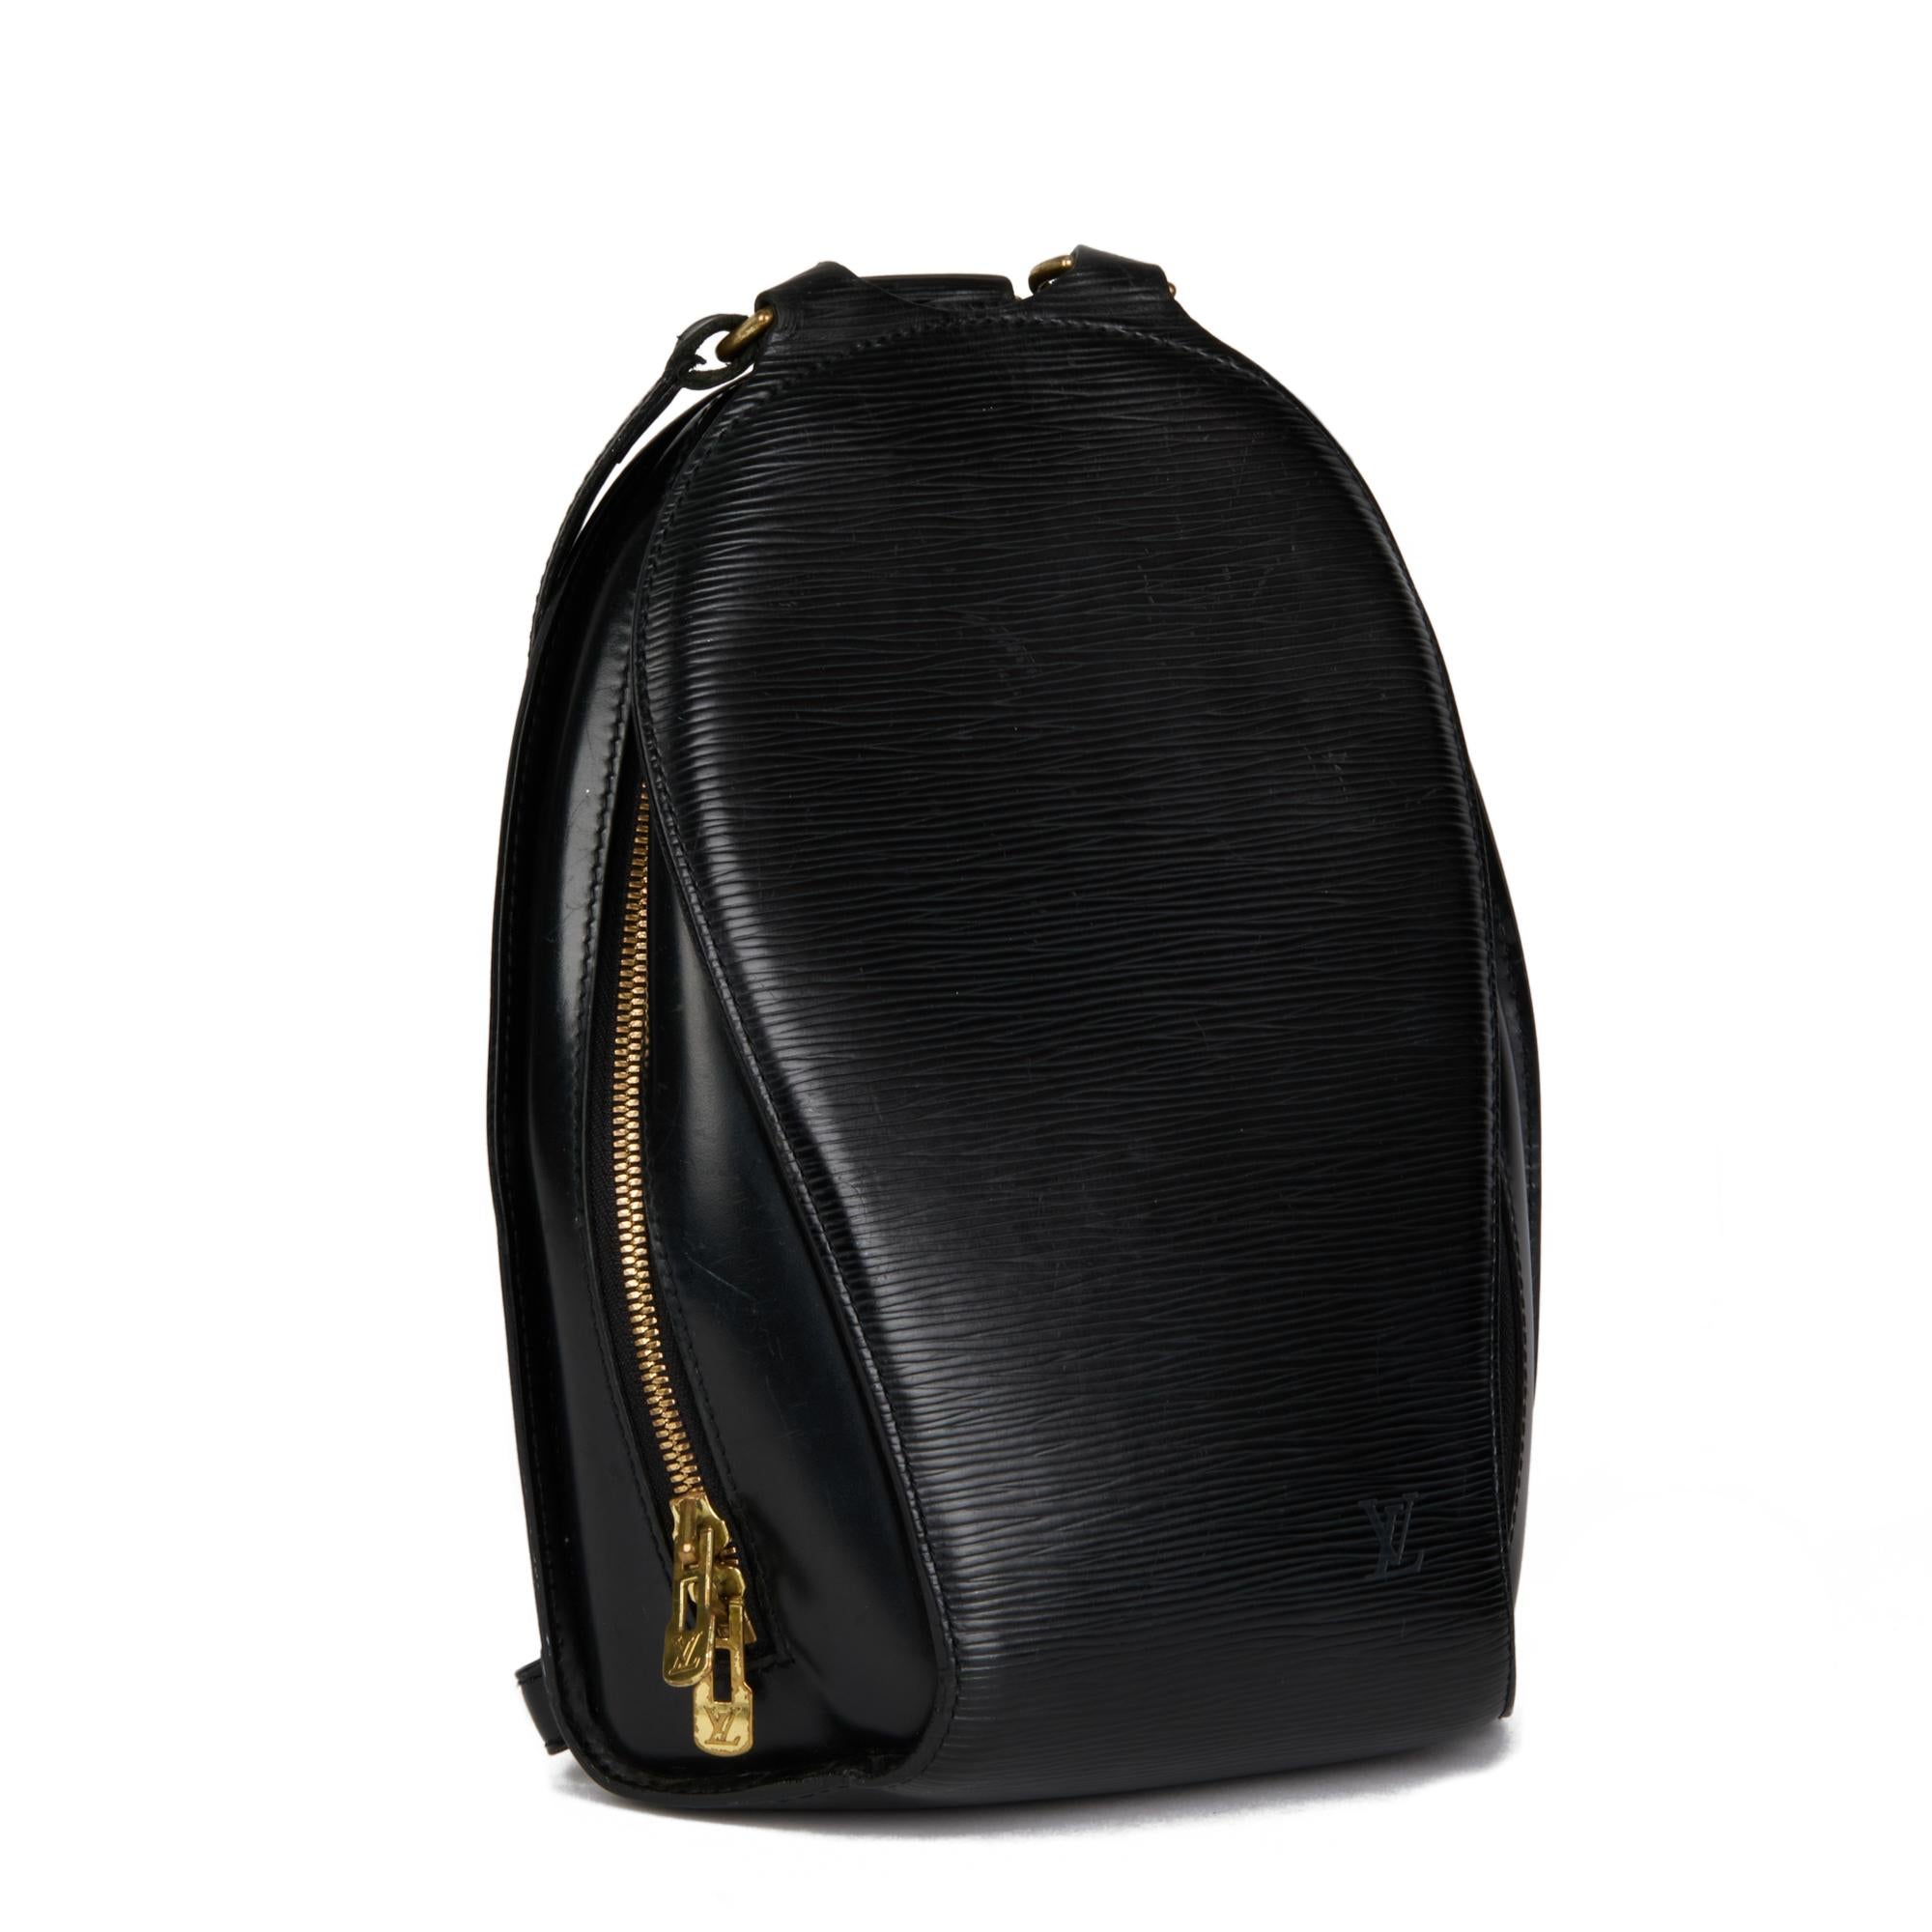 LOUIS VUITTON
Black Epi Leather Vintage Mabillon Backpack

Xupes Reference: CB635
Serial Number: VI 0021
Age (Circa): 2001
Authenticity Details: Date Stamp (Made in France)
Gender: Ladies
Type: Backpack

Colour: Black
Hardware: Golden